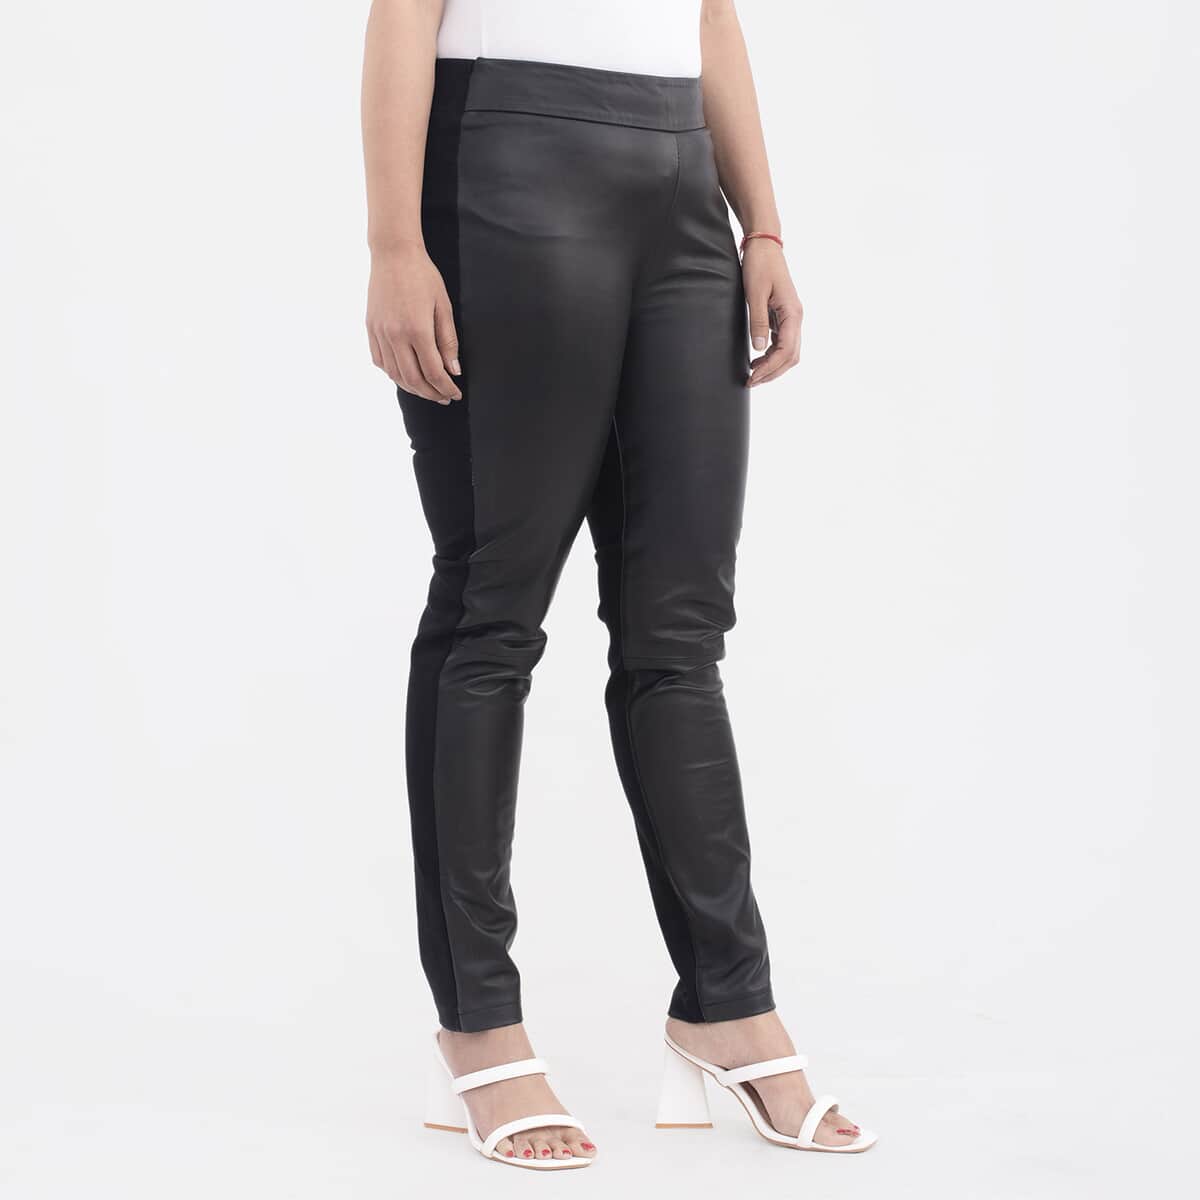 Tamsy Black Genuine Lamb Leather With Back Ponte Knit Legging - 3X image number 2